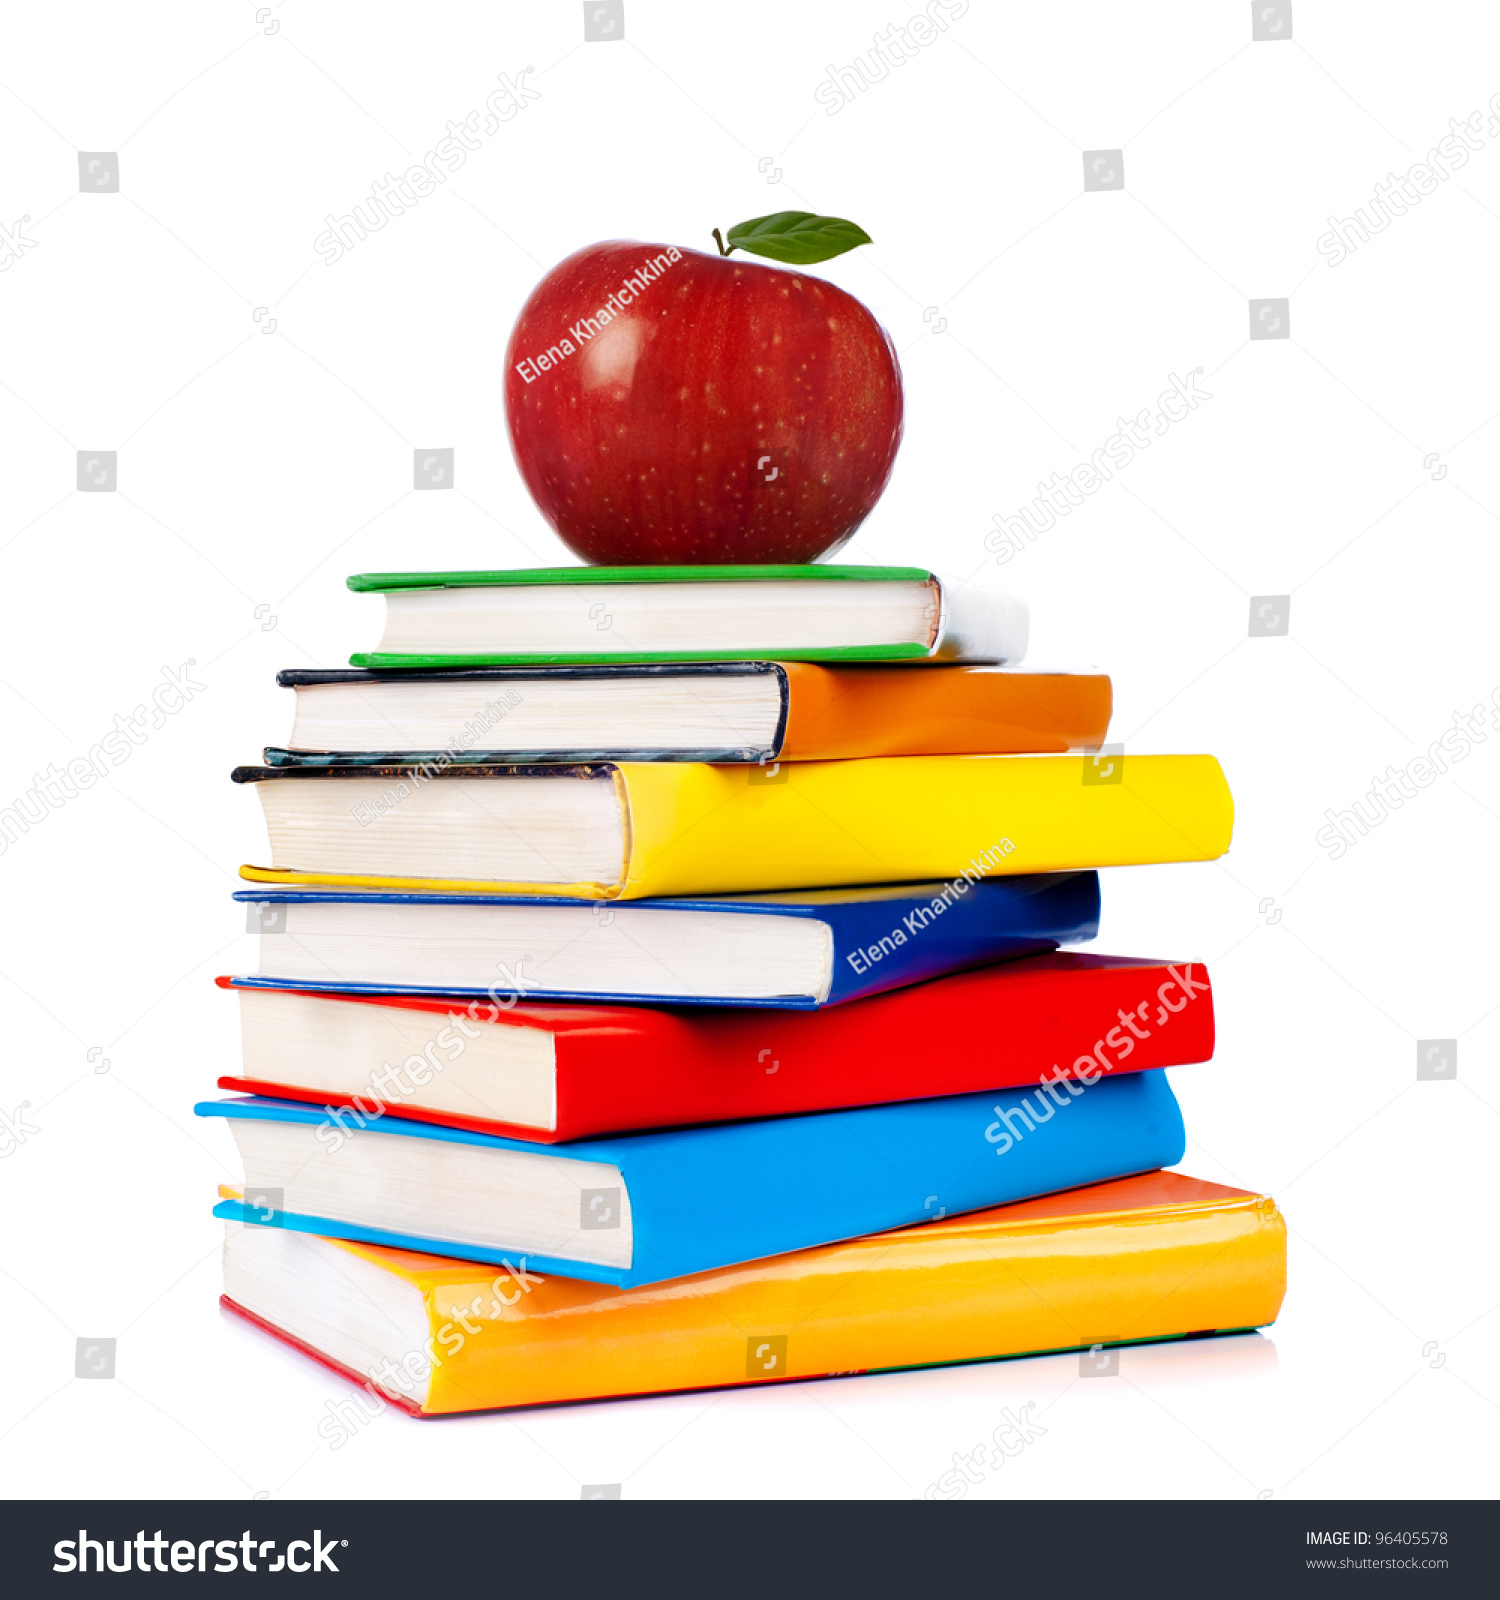 Books tower with apple isolated on white #96405578